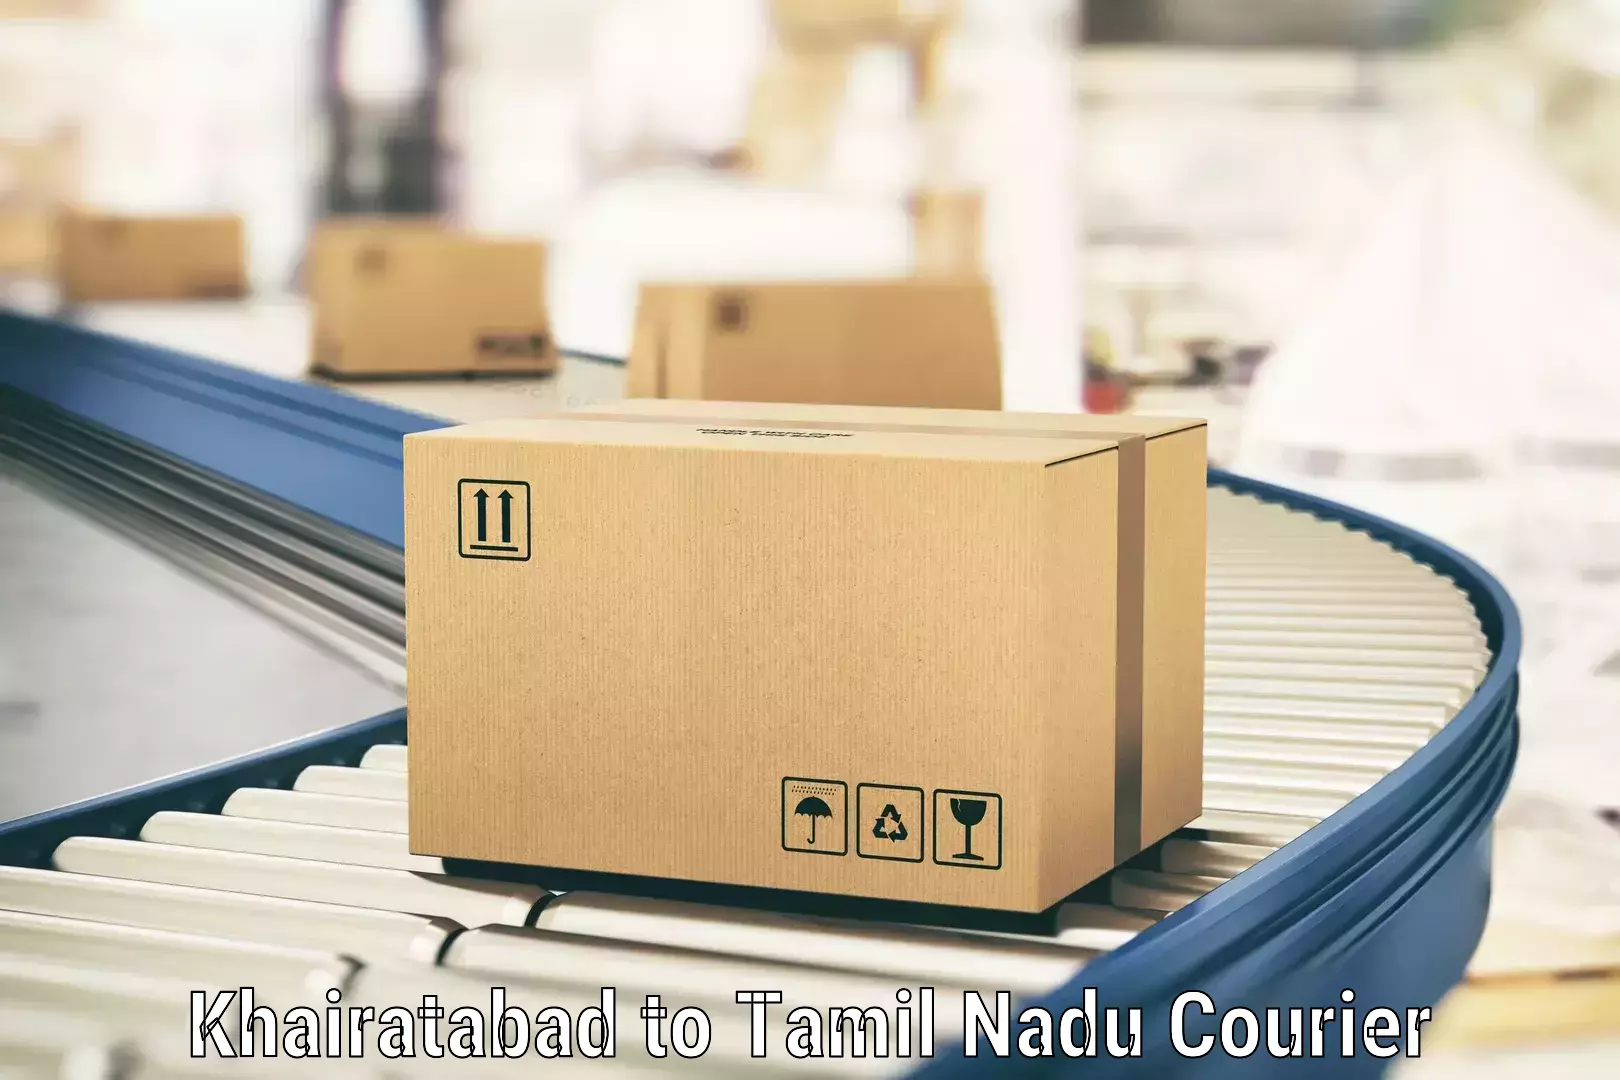 Efficient package consolidation Khairatabad to Papanasam